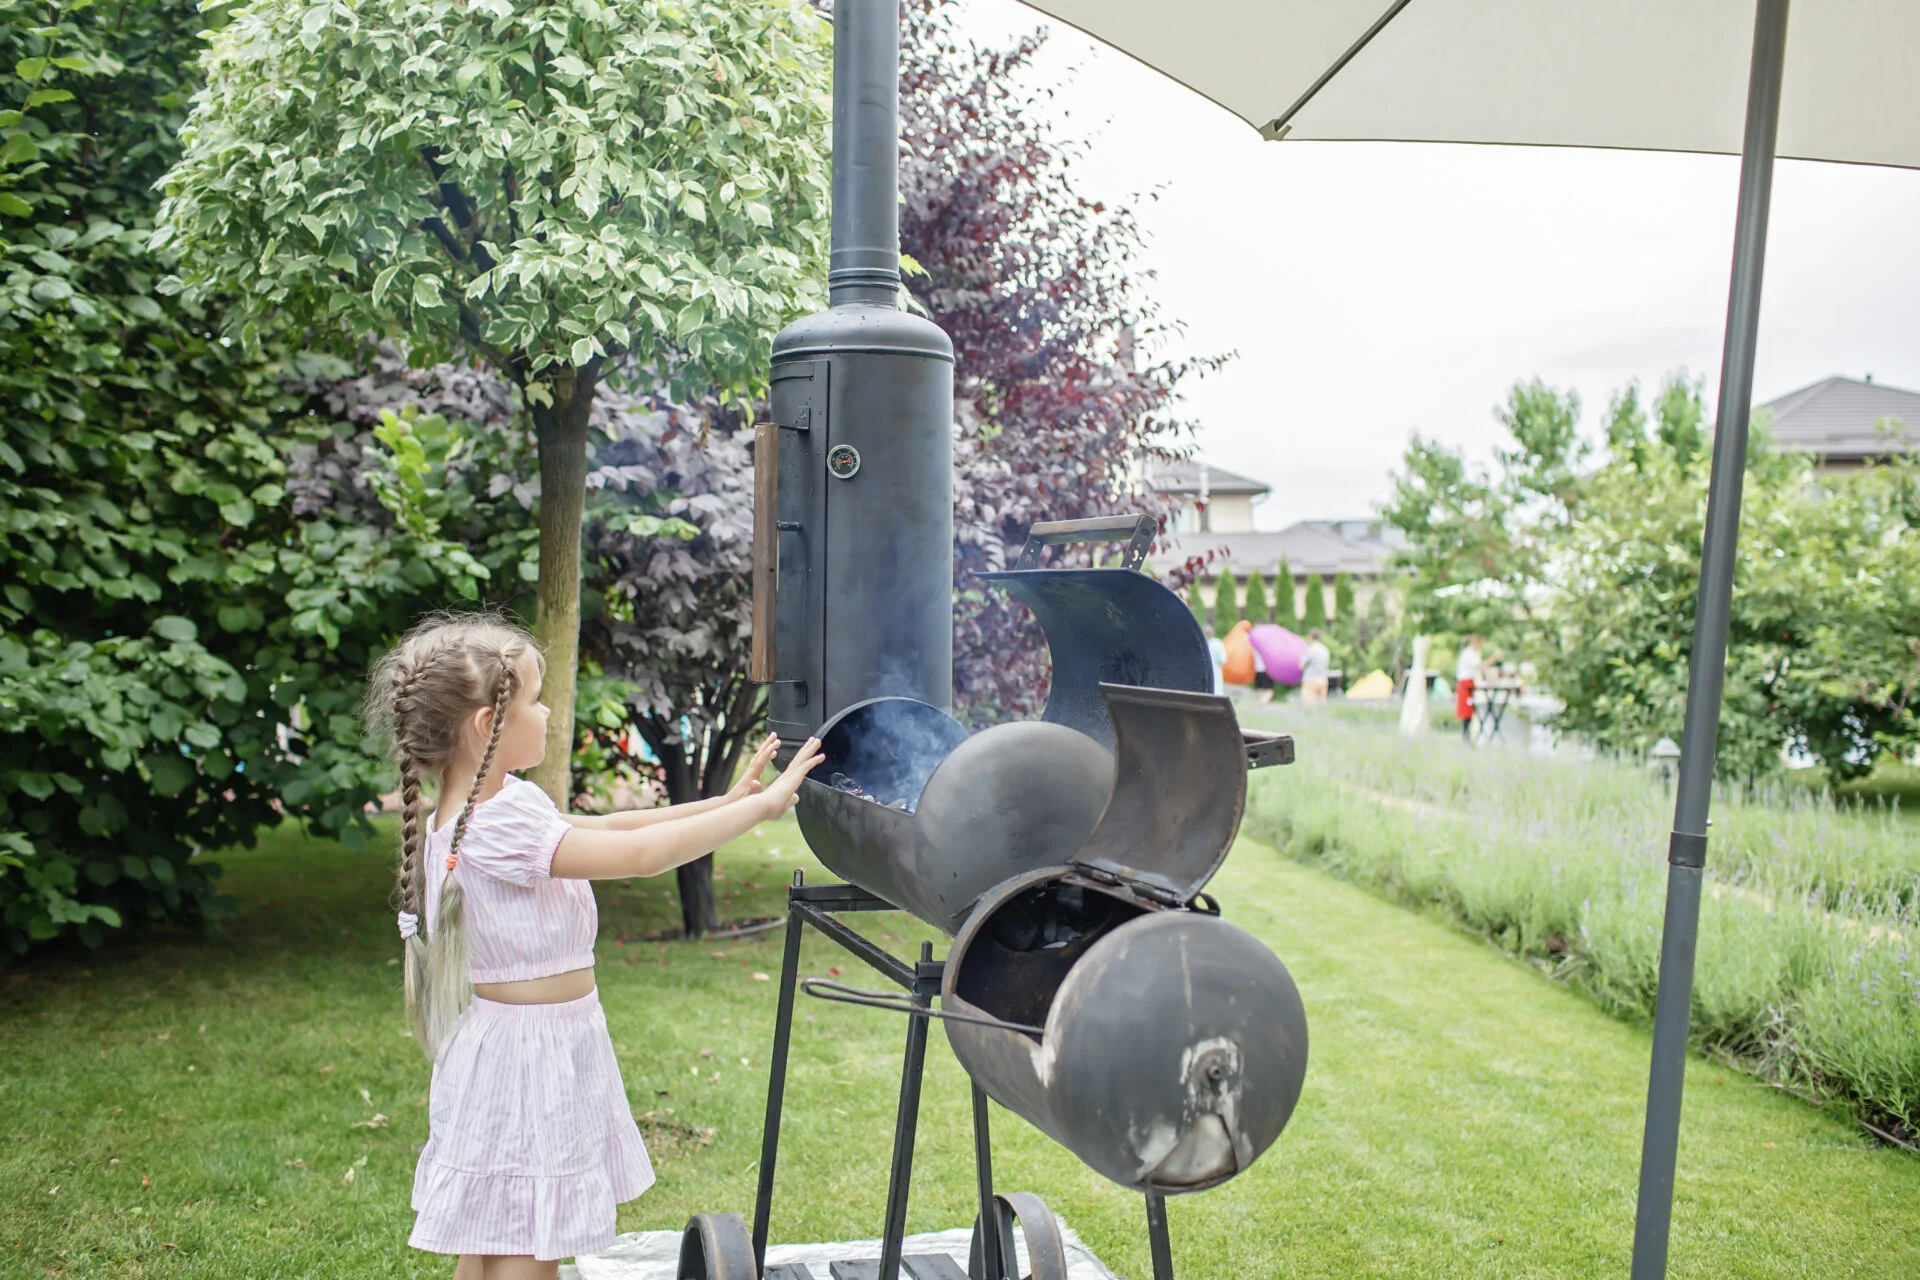 Smoker grill in home backyard, container with coal, smoke coming out of a smokestack, barbecue on green background, family patio, outdoor bbq party on open air